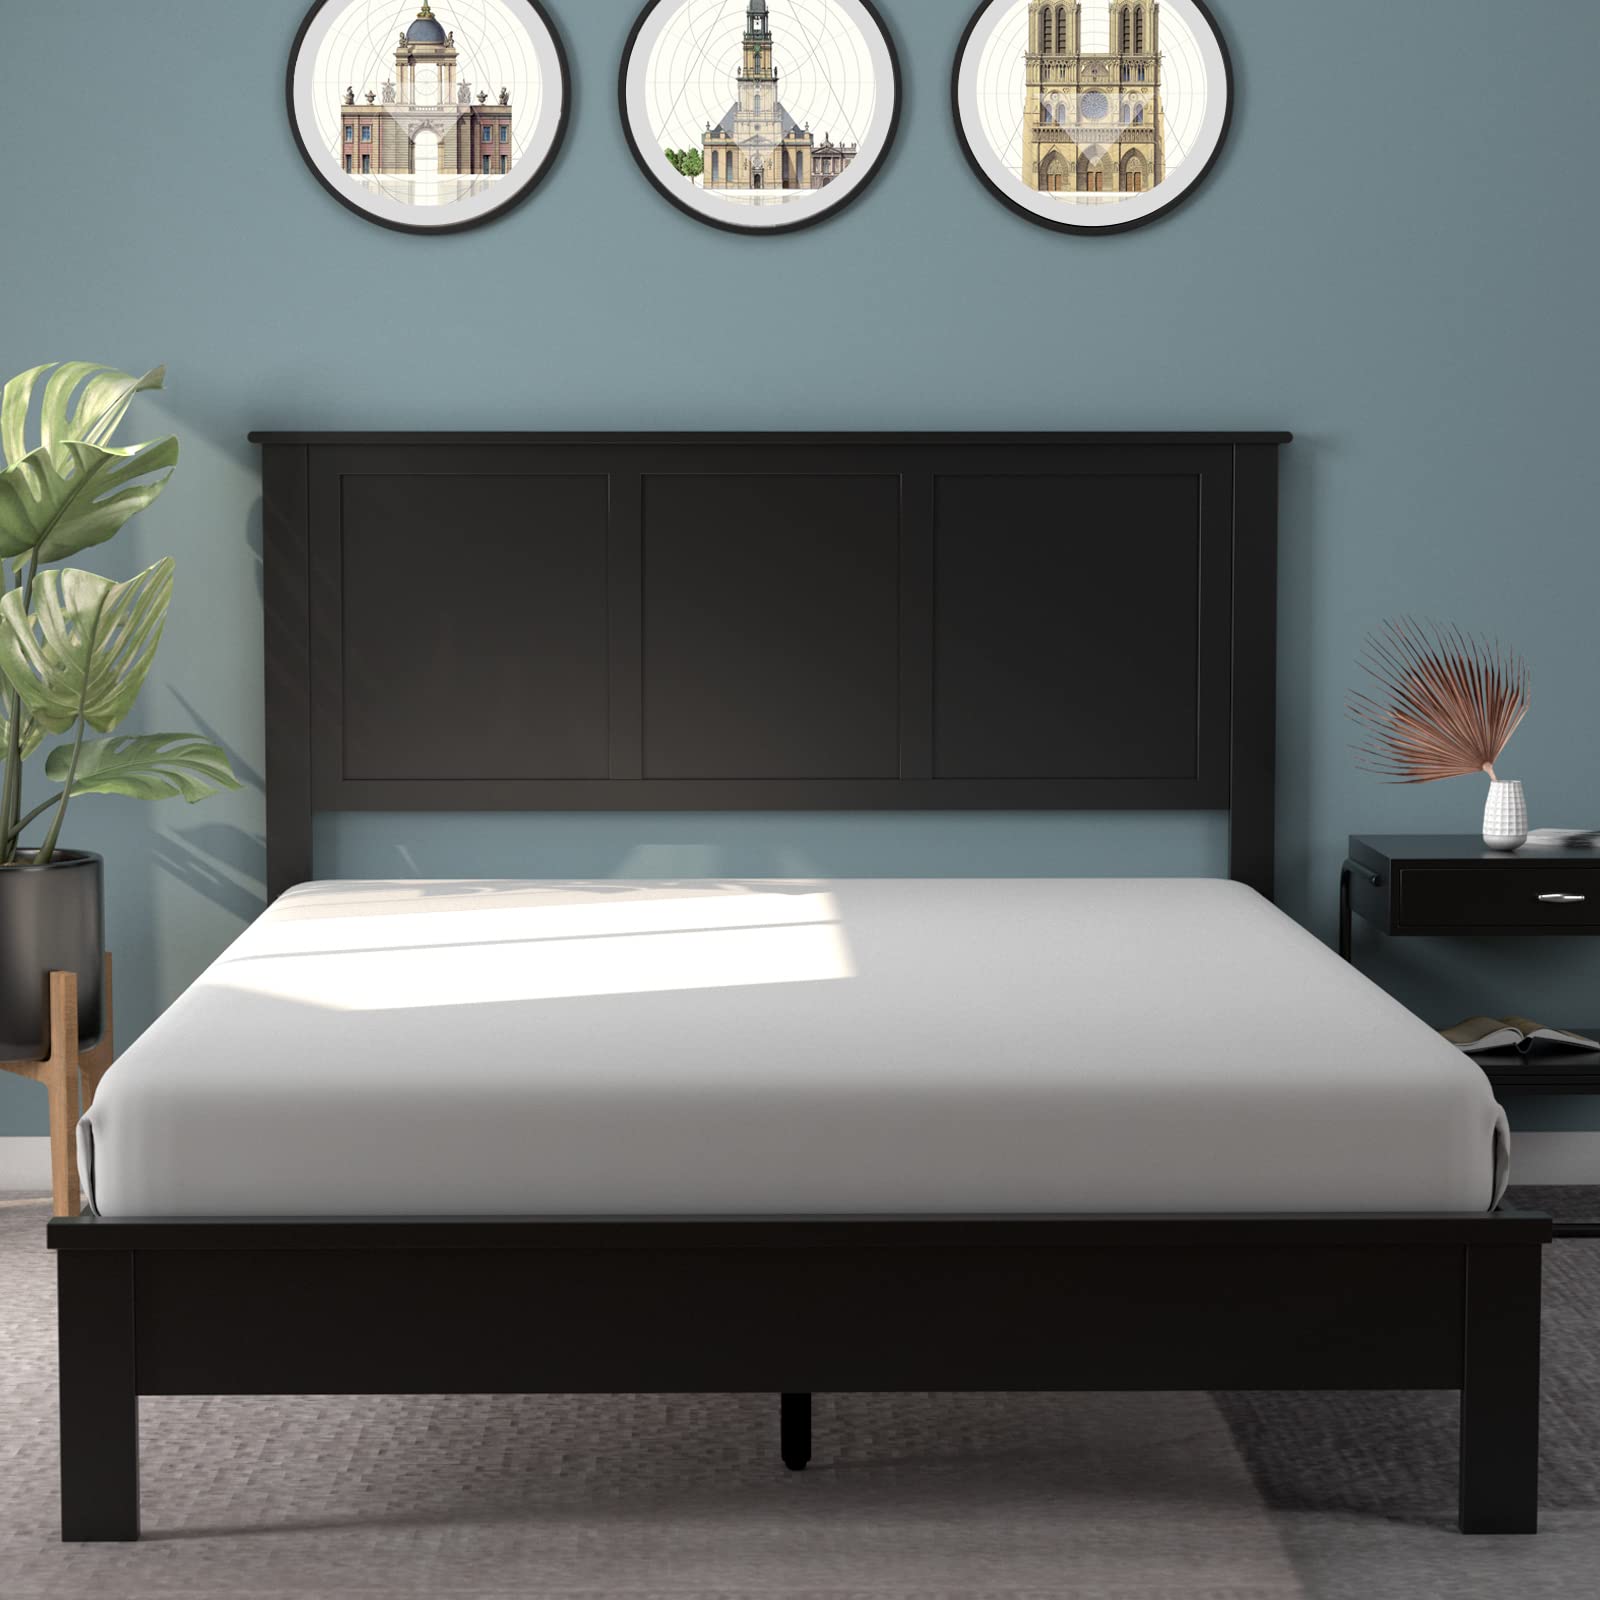 Giantex Wood Headboard, Flat Panel Headboard with Pre-drilled Holes for Height Adjustment